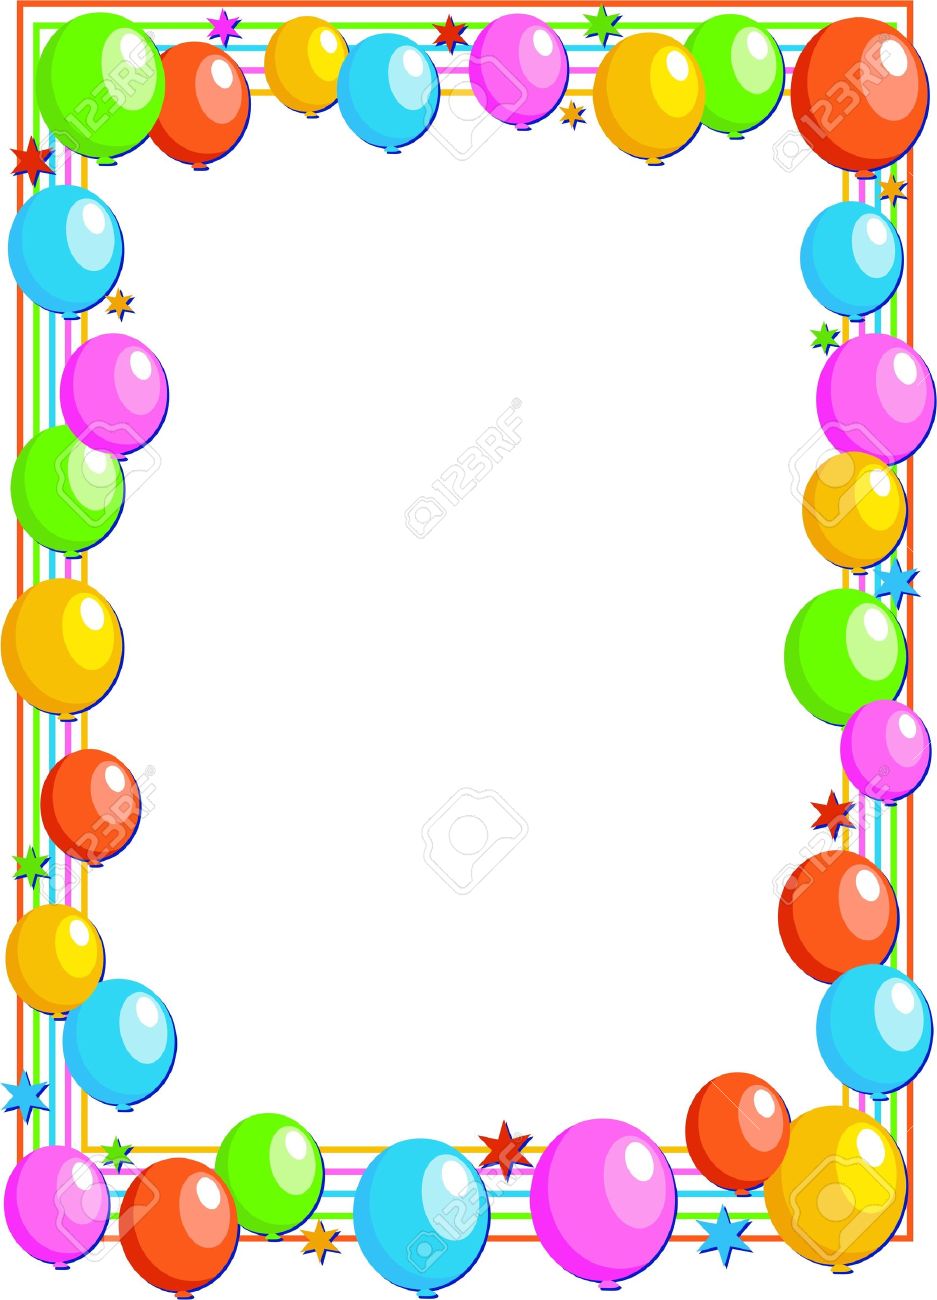 Birthday Party Border | Free download on ClipArtMag